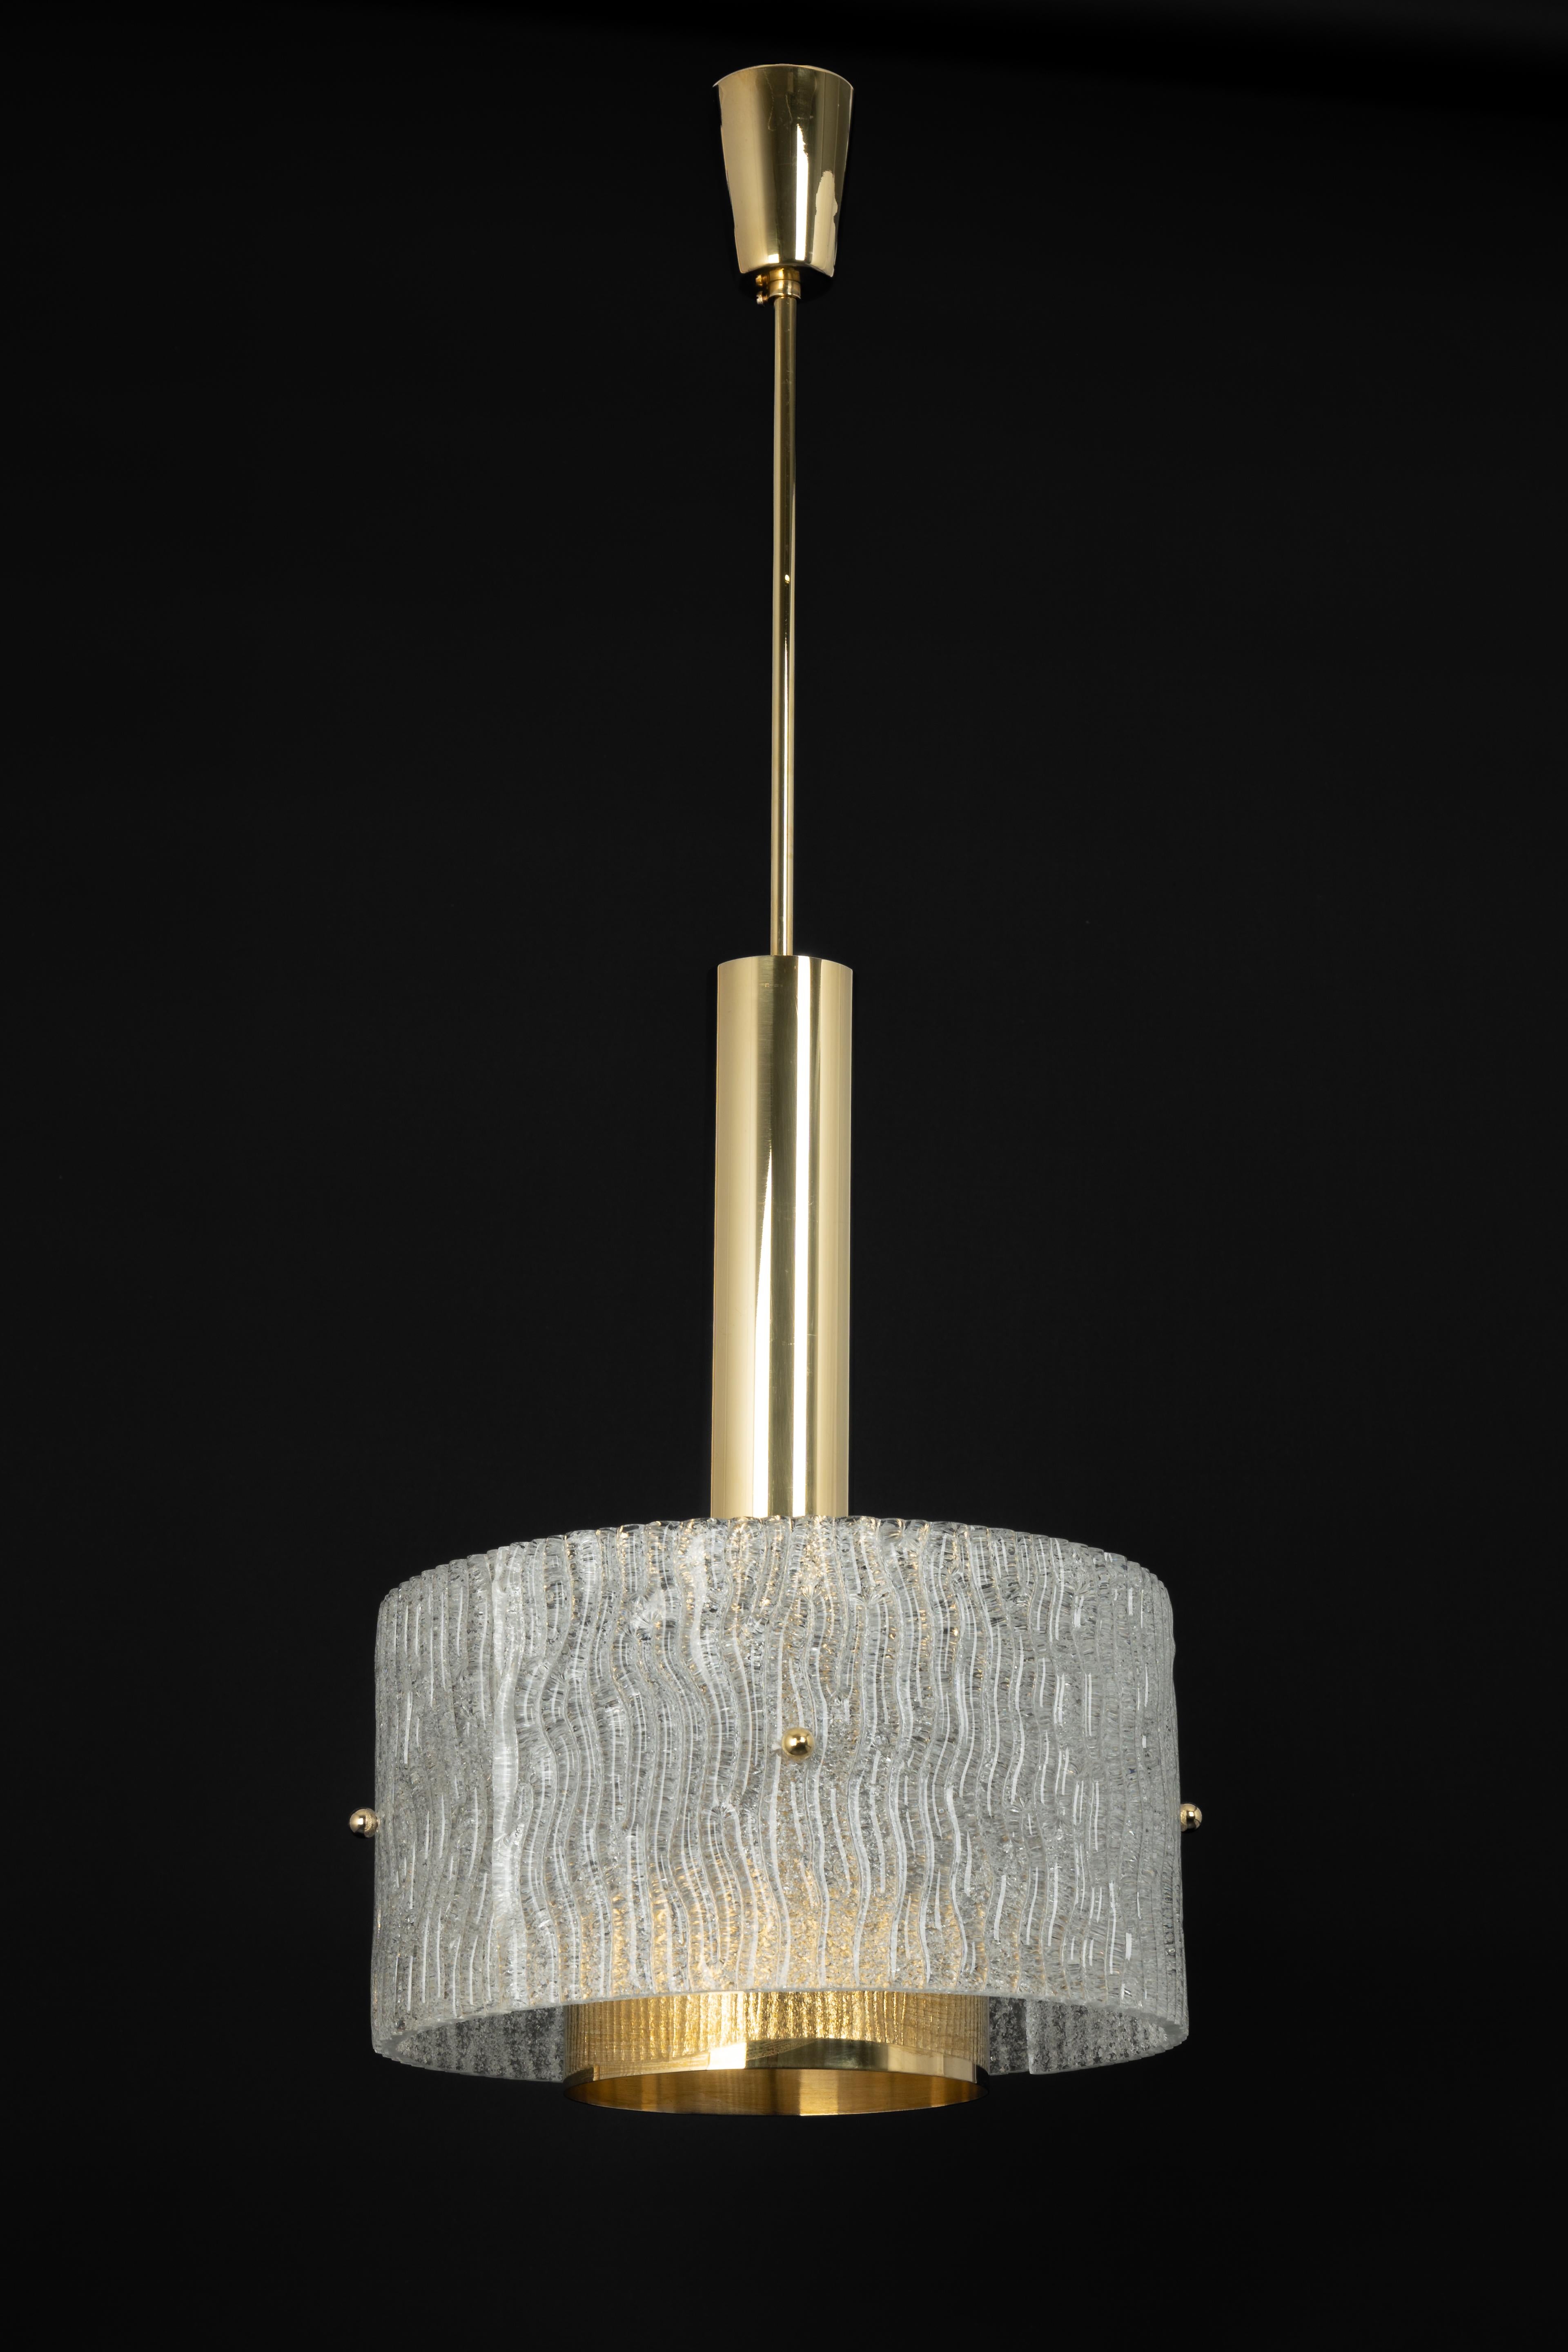 Large Murano Pendant Lights by Hillebrand, 1970s For Sale 3